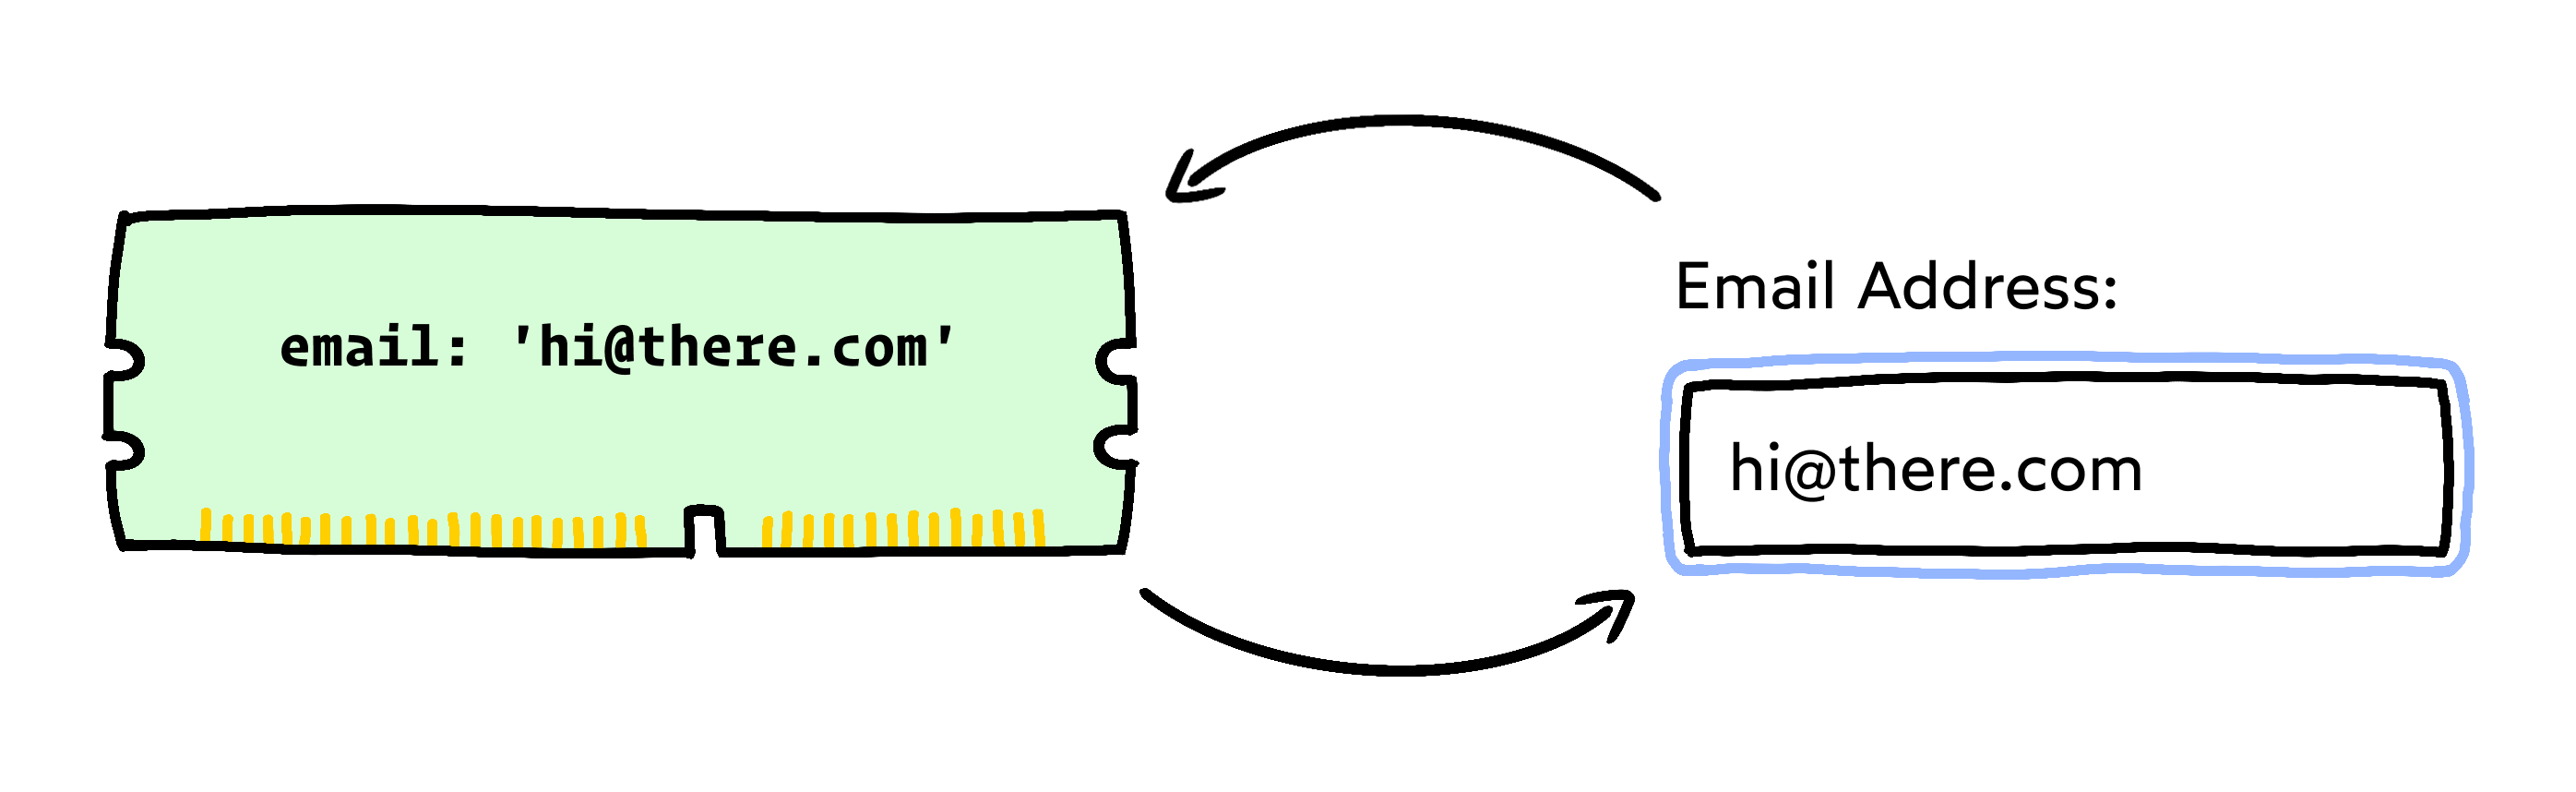 Hand-drawn sketch. On one side, a computer memory stick holds the key/value pair “email” set to “hi@there.com”. On the other side, a text input is labeled “Email address” and has the value “hi@there.com”. An arrow from the memory stick points to the input, and an arrow from the input points to the memory stick.